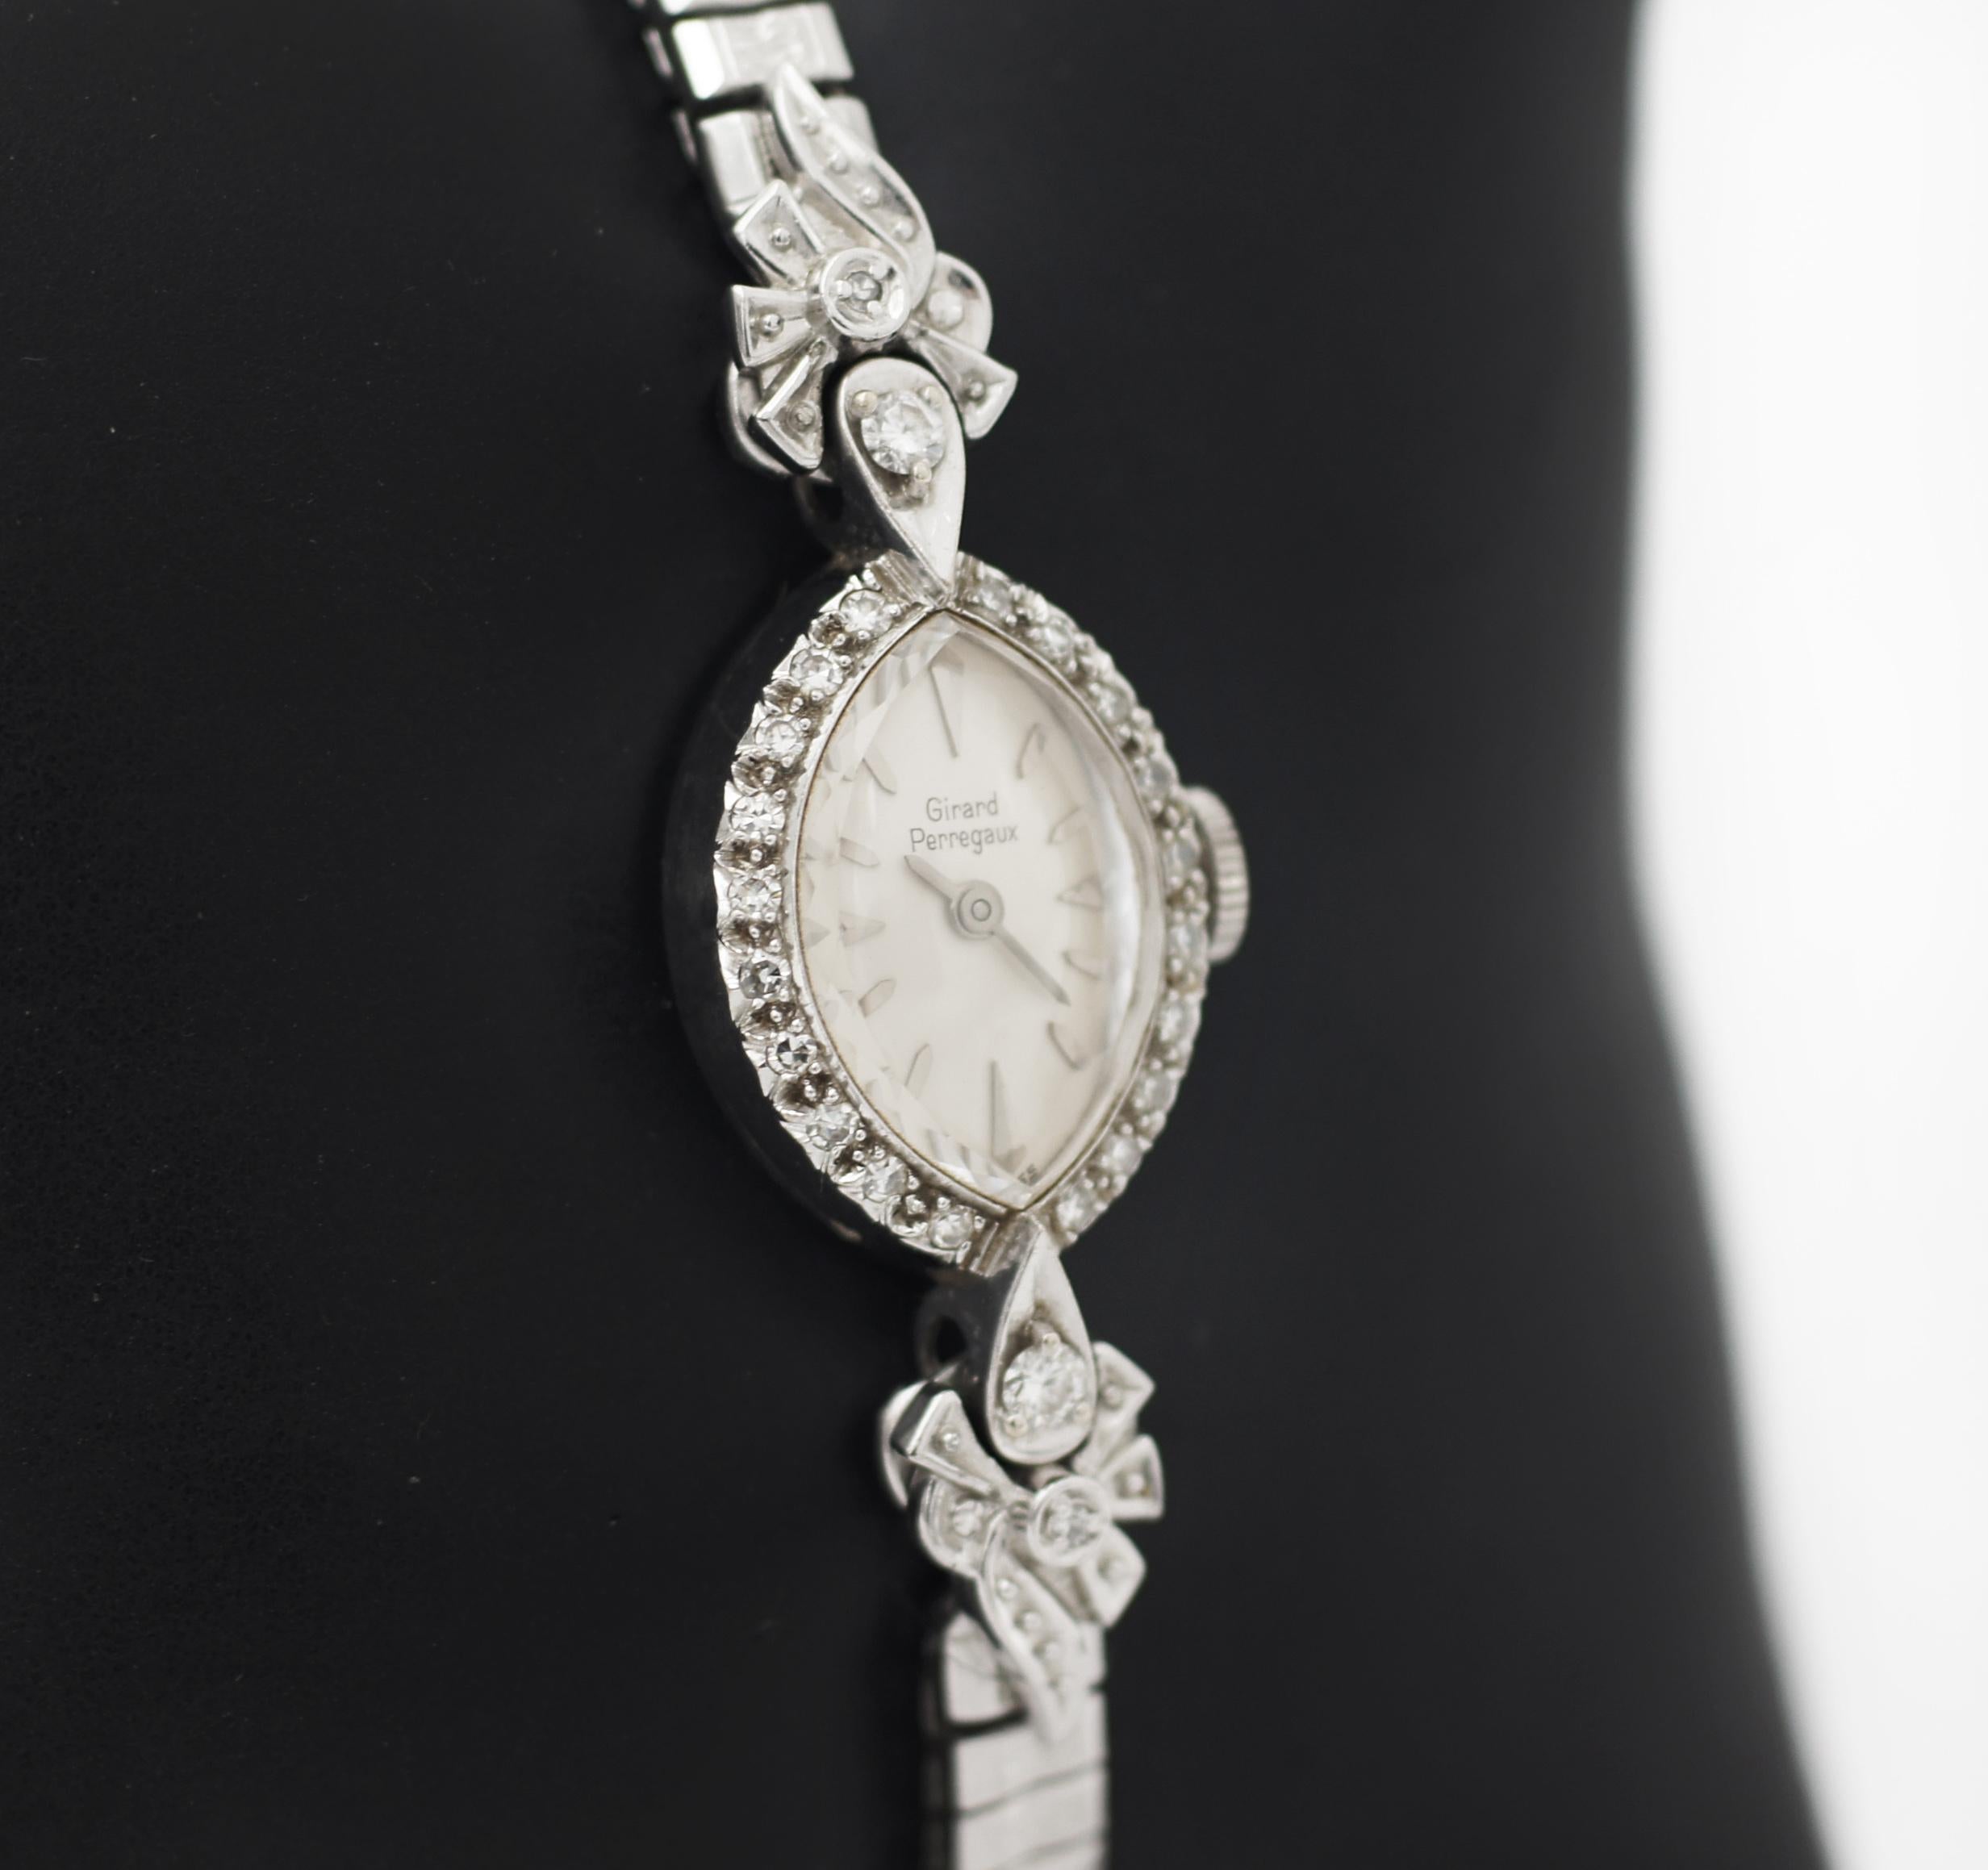 Girard Perregaux
14K White Gold Case
Diamond Bezel and lugs
Approx. 15mm W x 20mm H case
Silver like dial and white gold markers and Hour and minute sweeping hands
Approx. 5 mm wide bracelet
Watch approx. 7